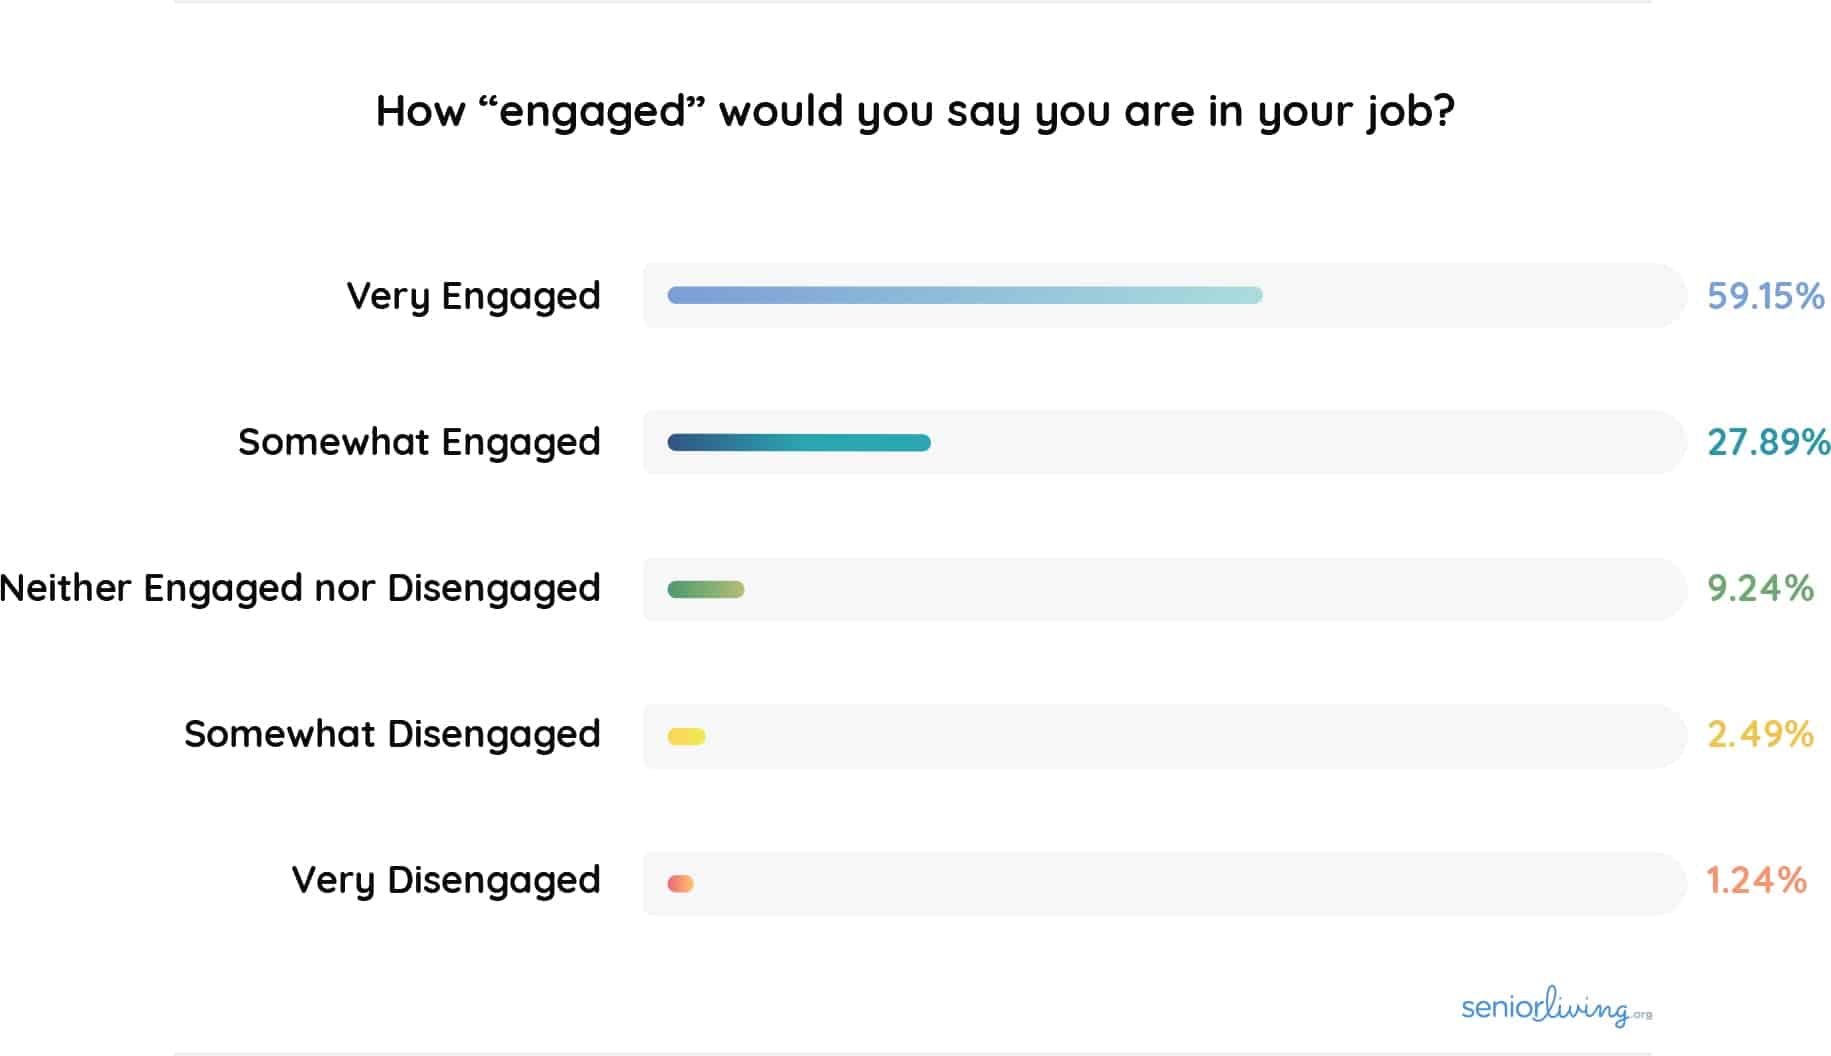 How “engaged” would you say you are in your job?